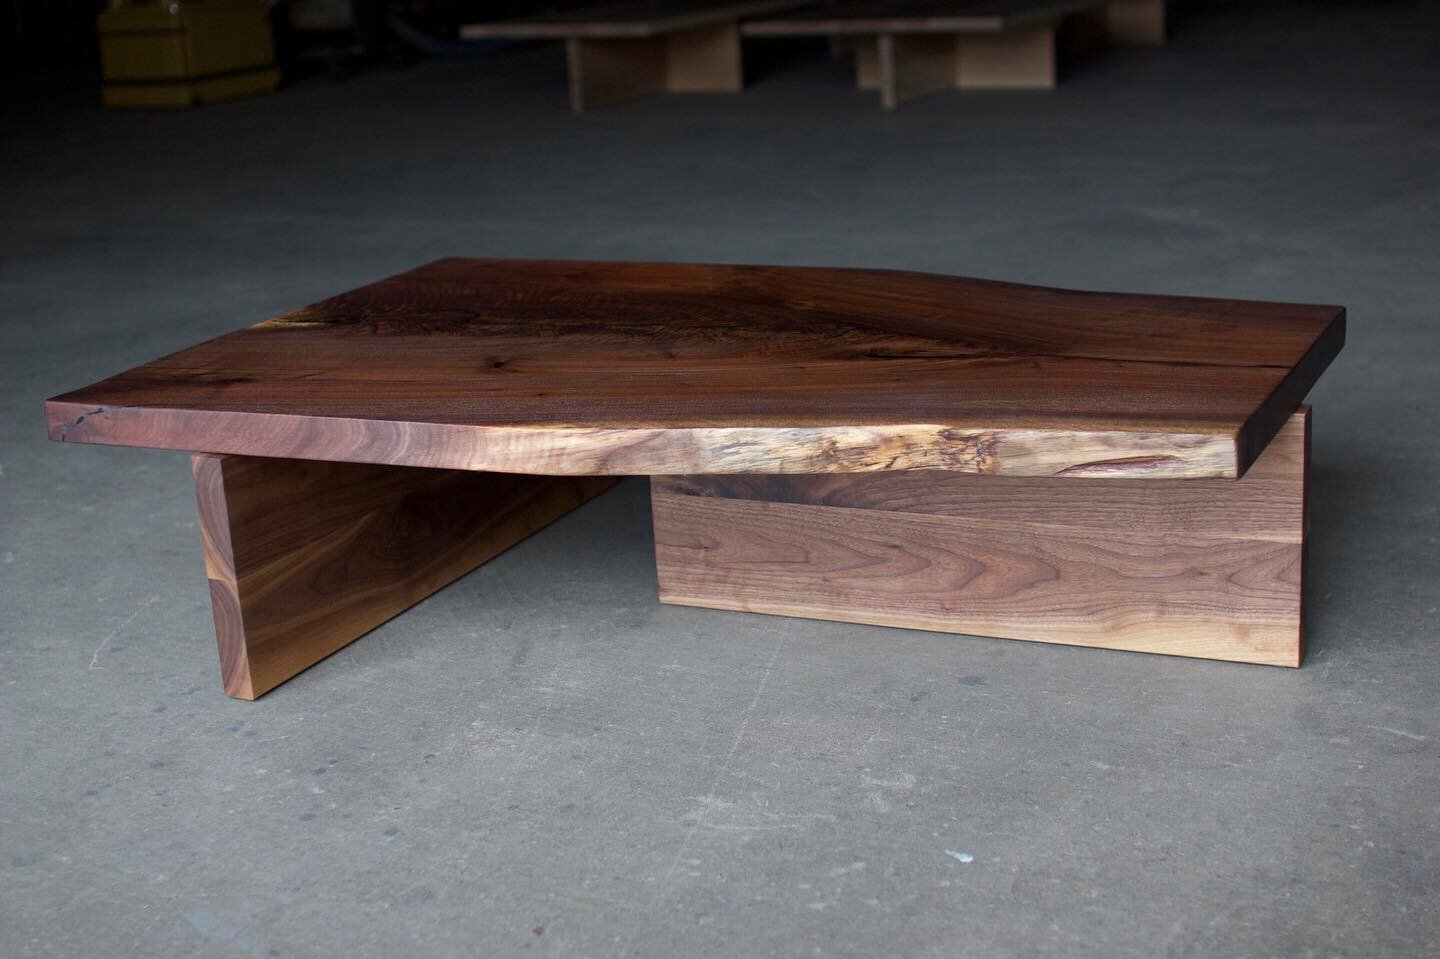 Solid Walnut Coffee Table Concept complete // You asked for more ship-ready items, and although it won&rsquo;t be often between semi-custom item orders and fun bigger jobs, inspiration strikes and here we are. 
55L x 35-25W x 14H&rdquo; 
$1950 
One a